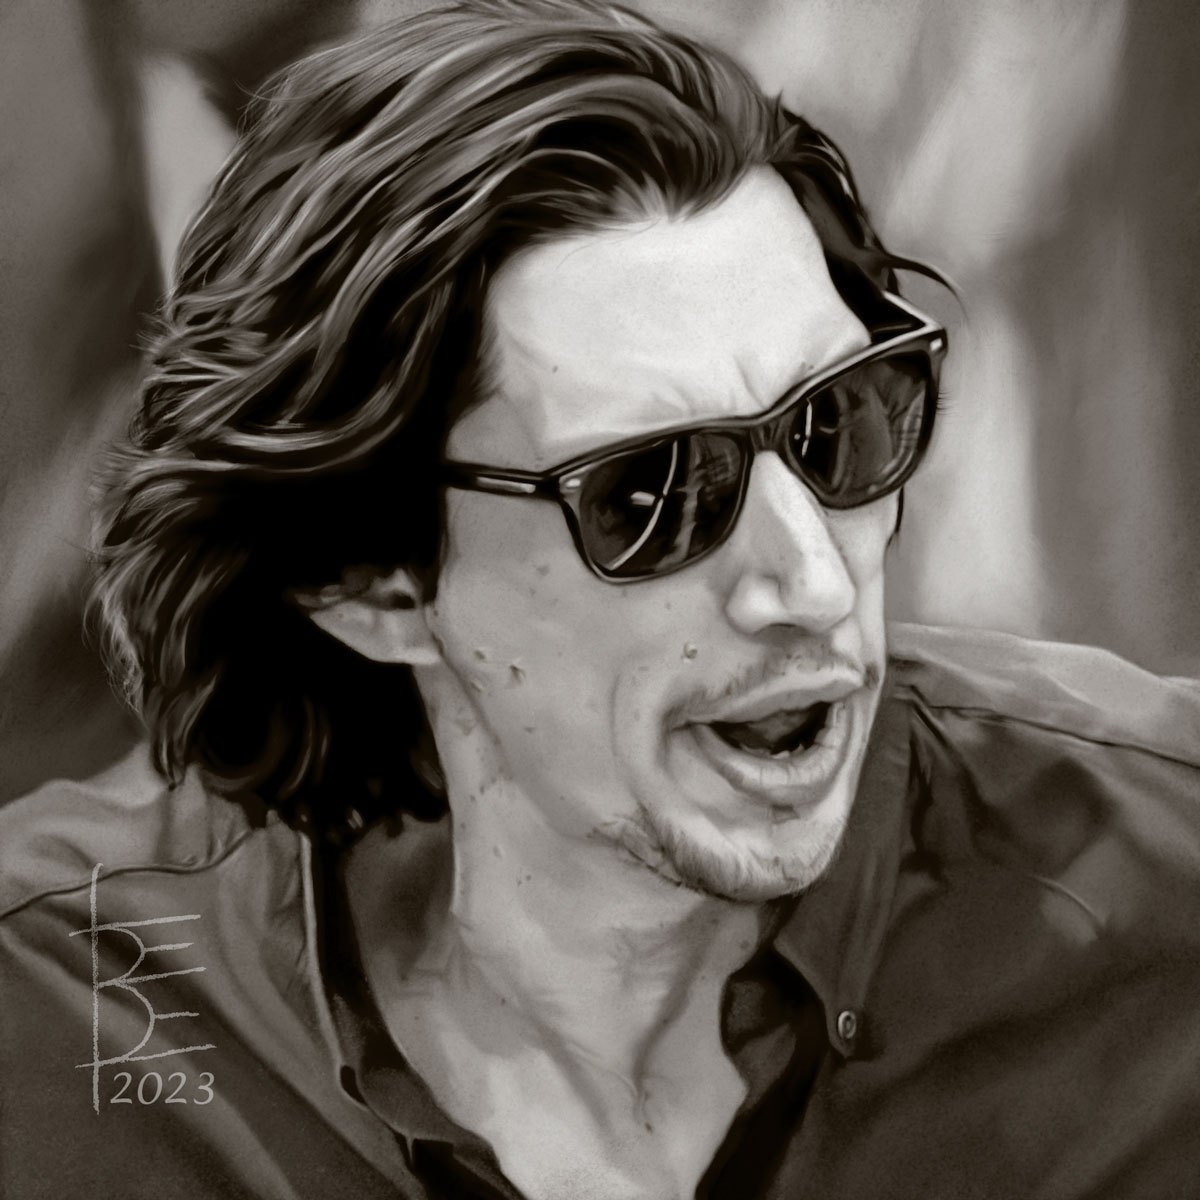 one year ago today we got to see this digital painting / indy500 / adam driver